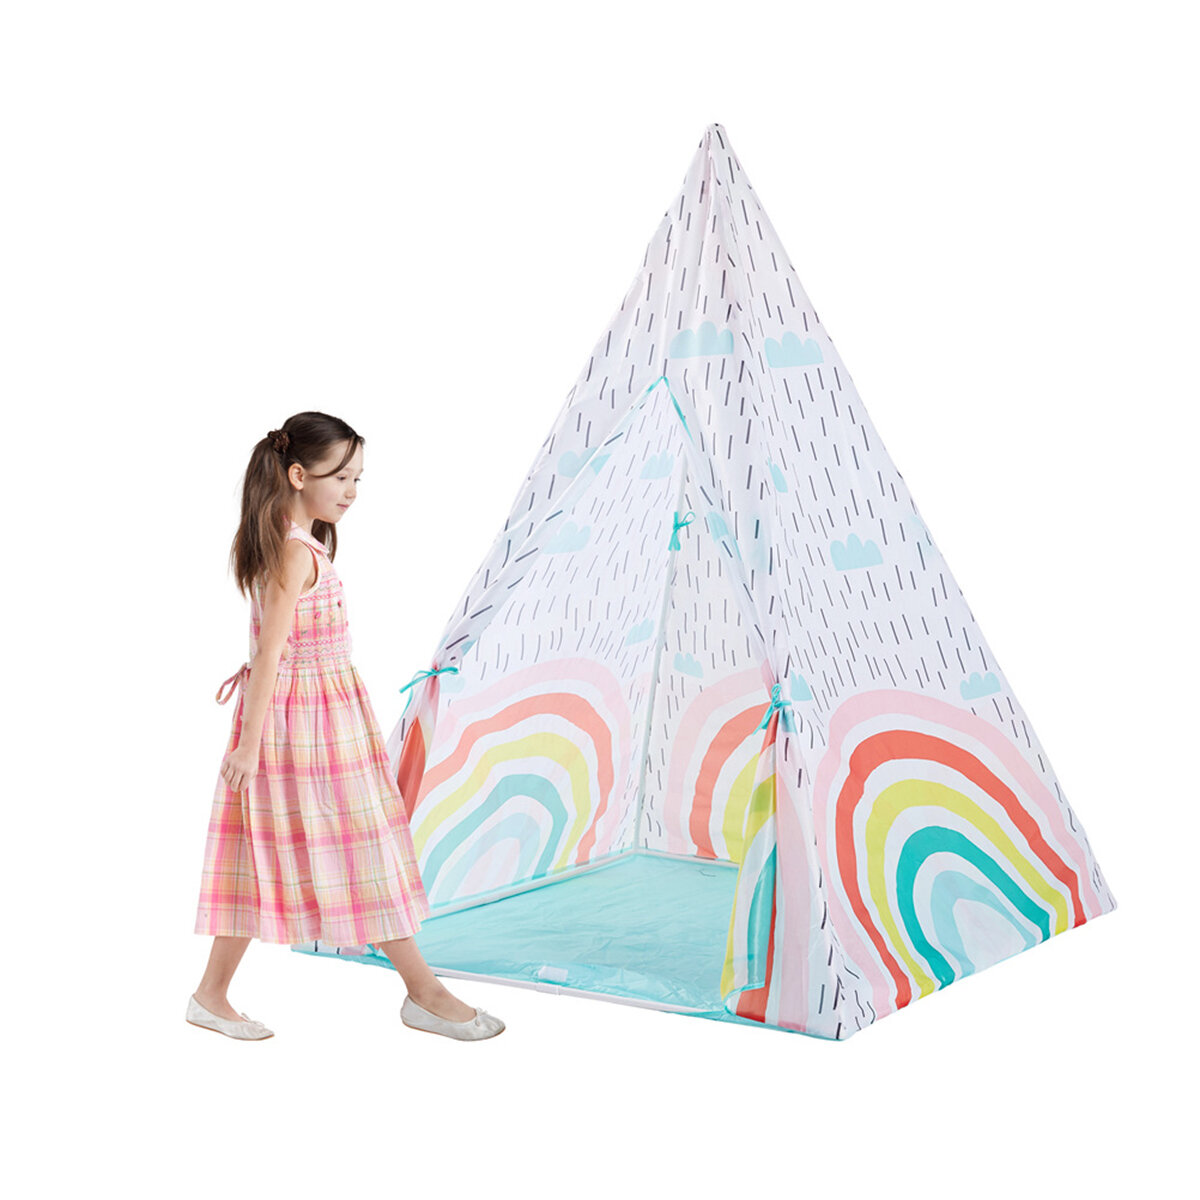 100cm140cm Large Kids Play Tent Teepee Children Playroom Indian Play House Room Baby Game Outdoor Indoor Home